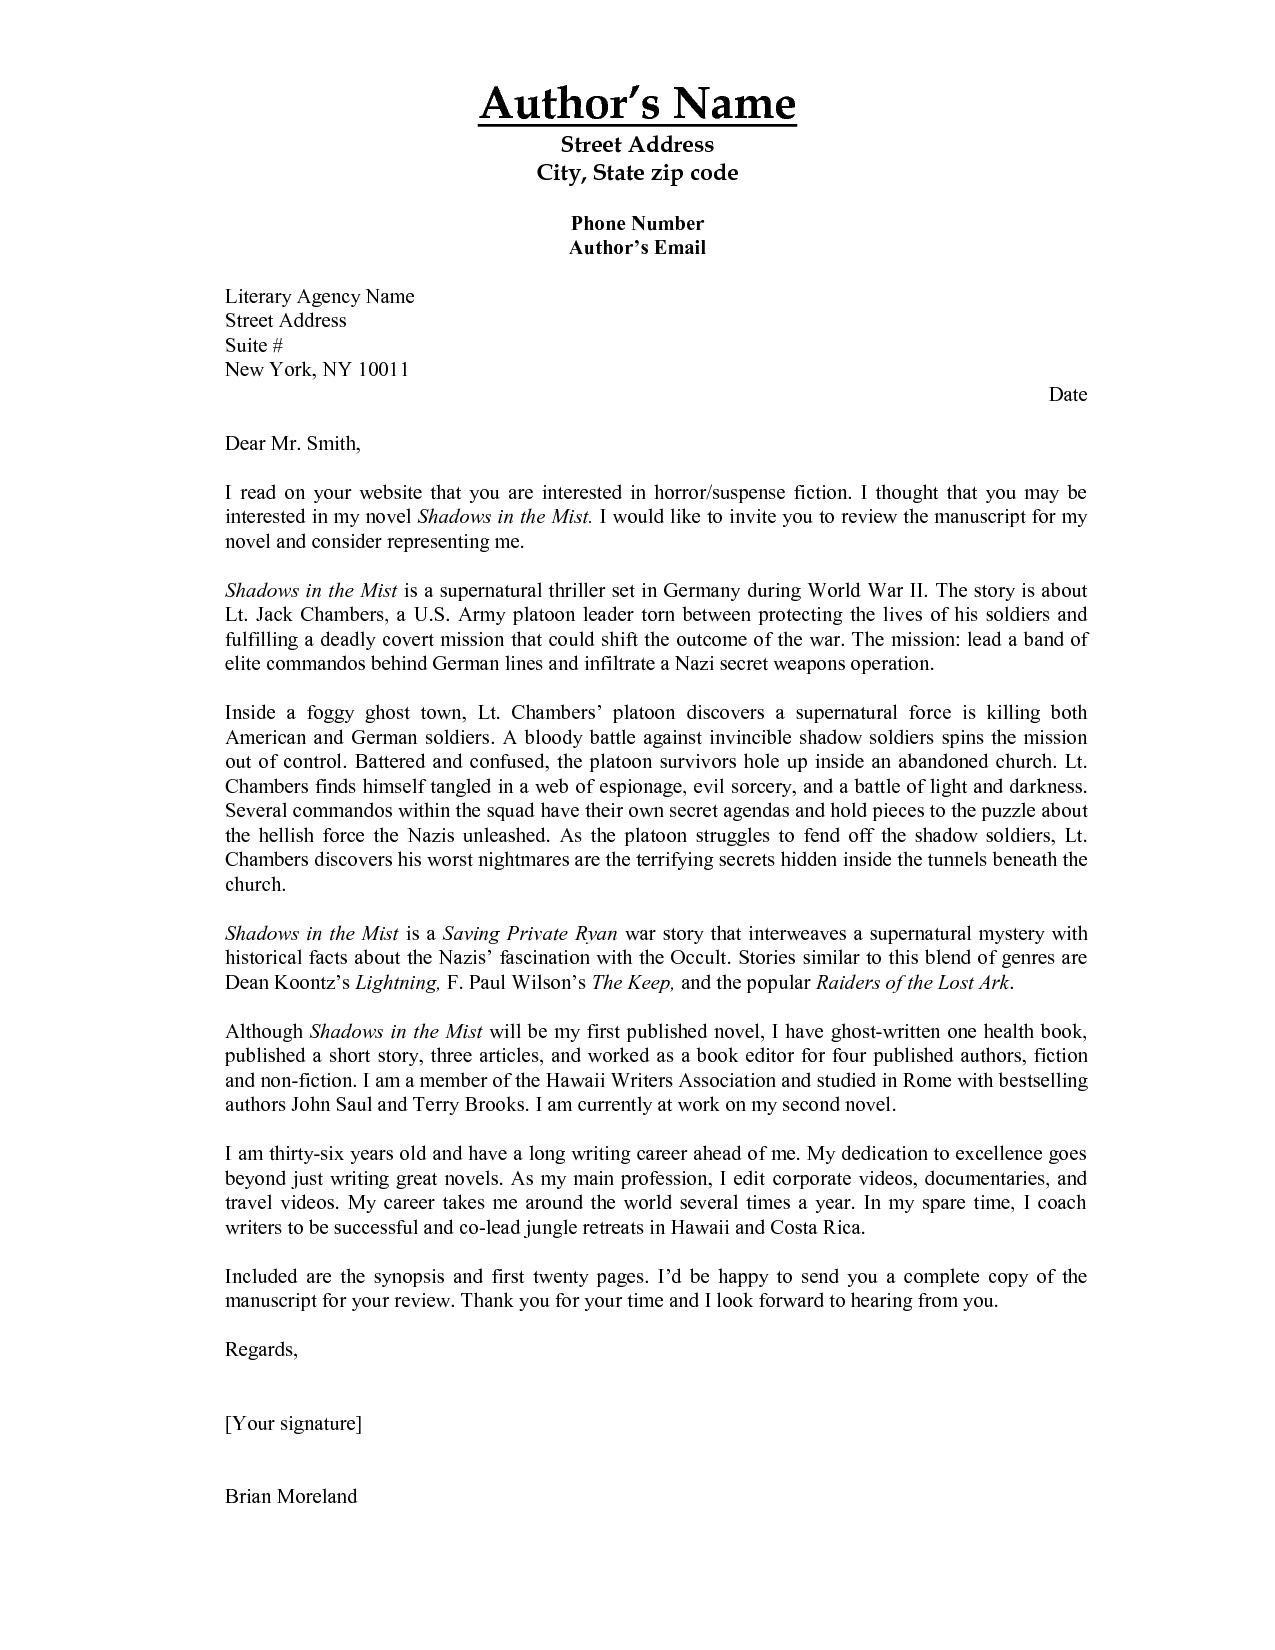 Query Letter Template Recommendation Letter Template intended for dimensions 1275 X 1650